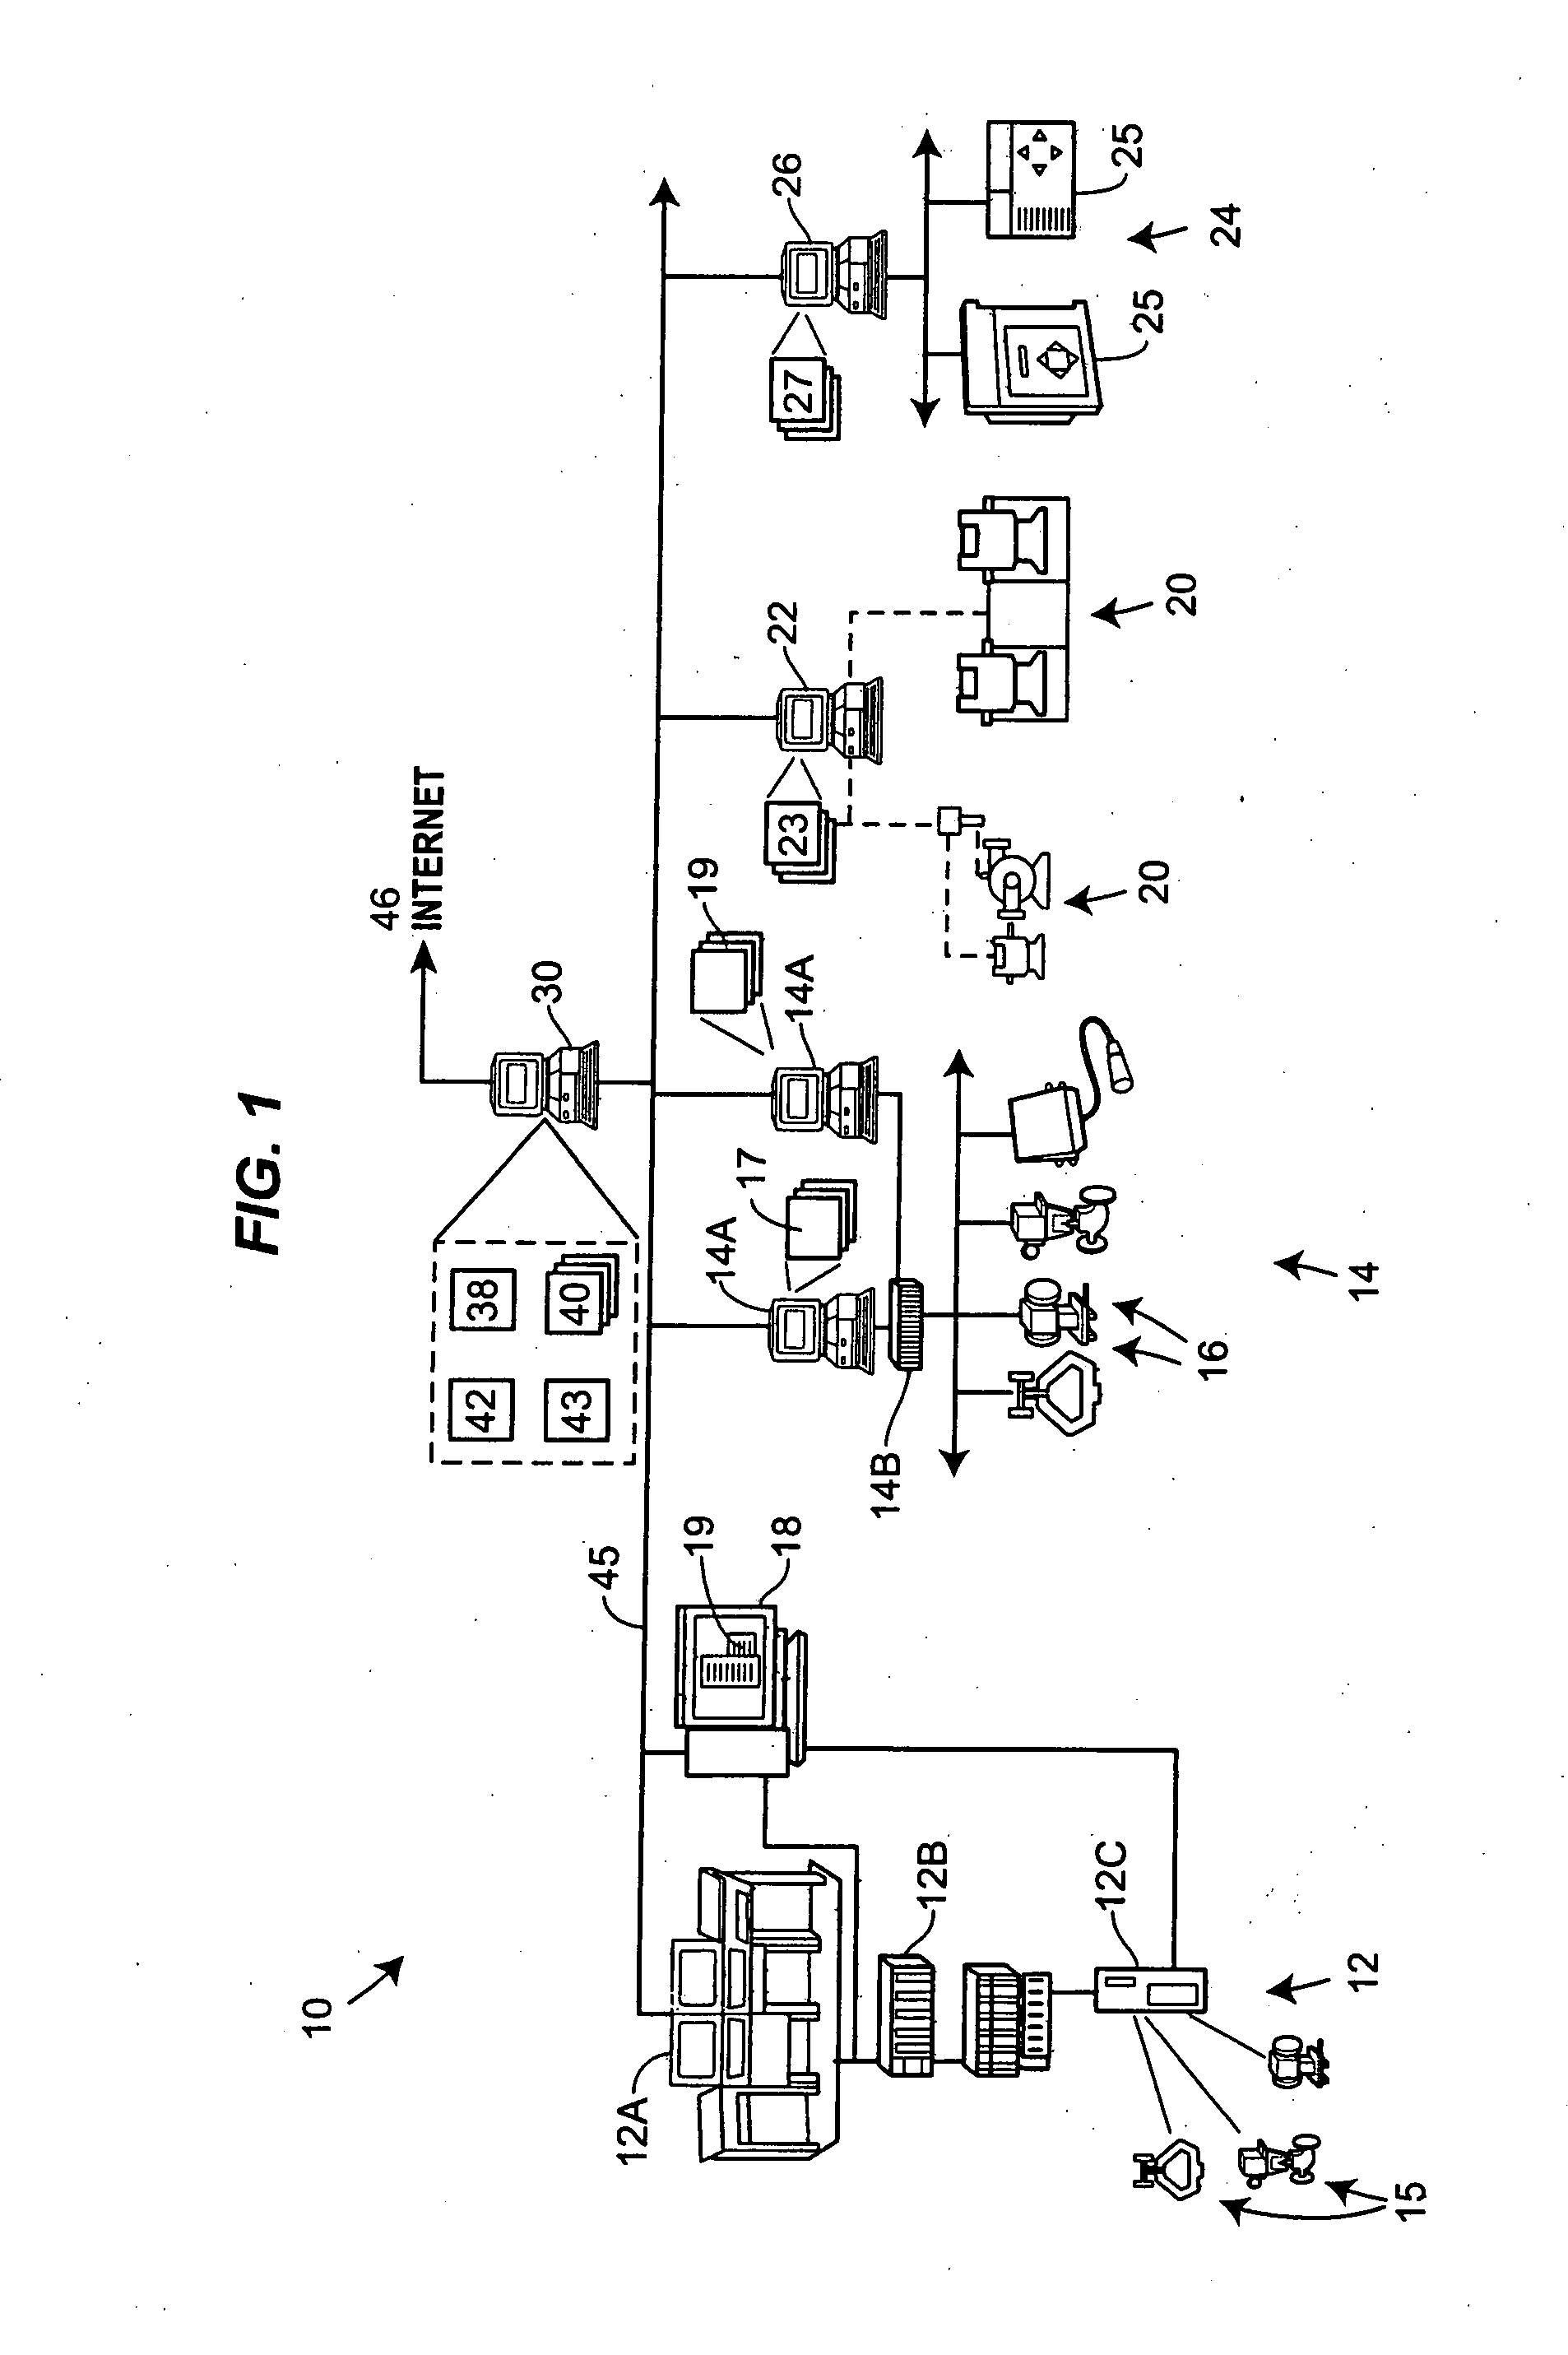 Field device with capability of calculating digital filter coefficients